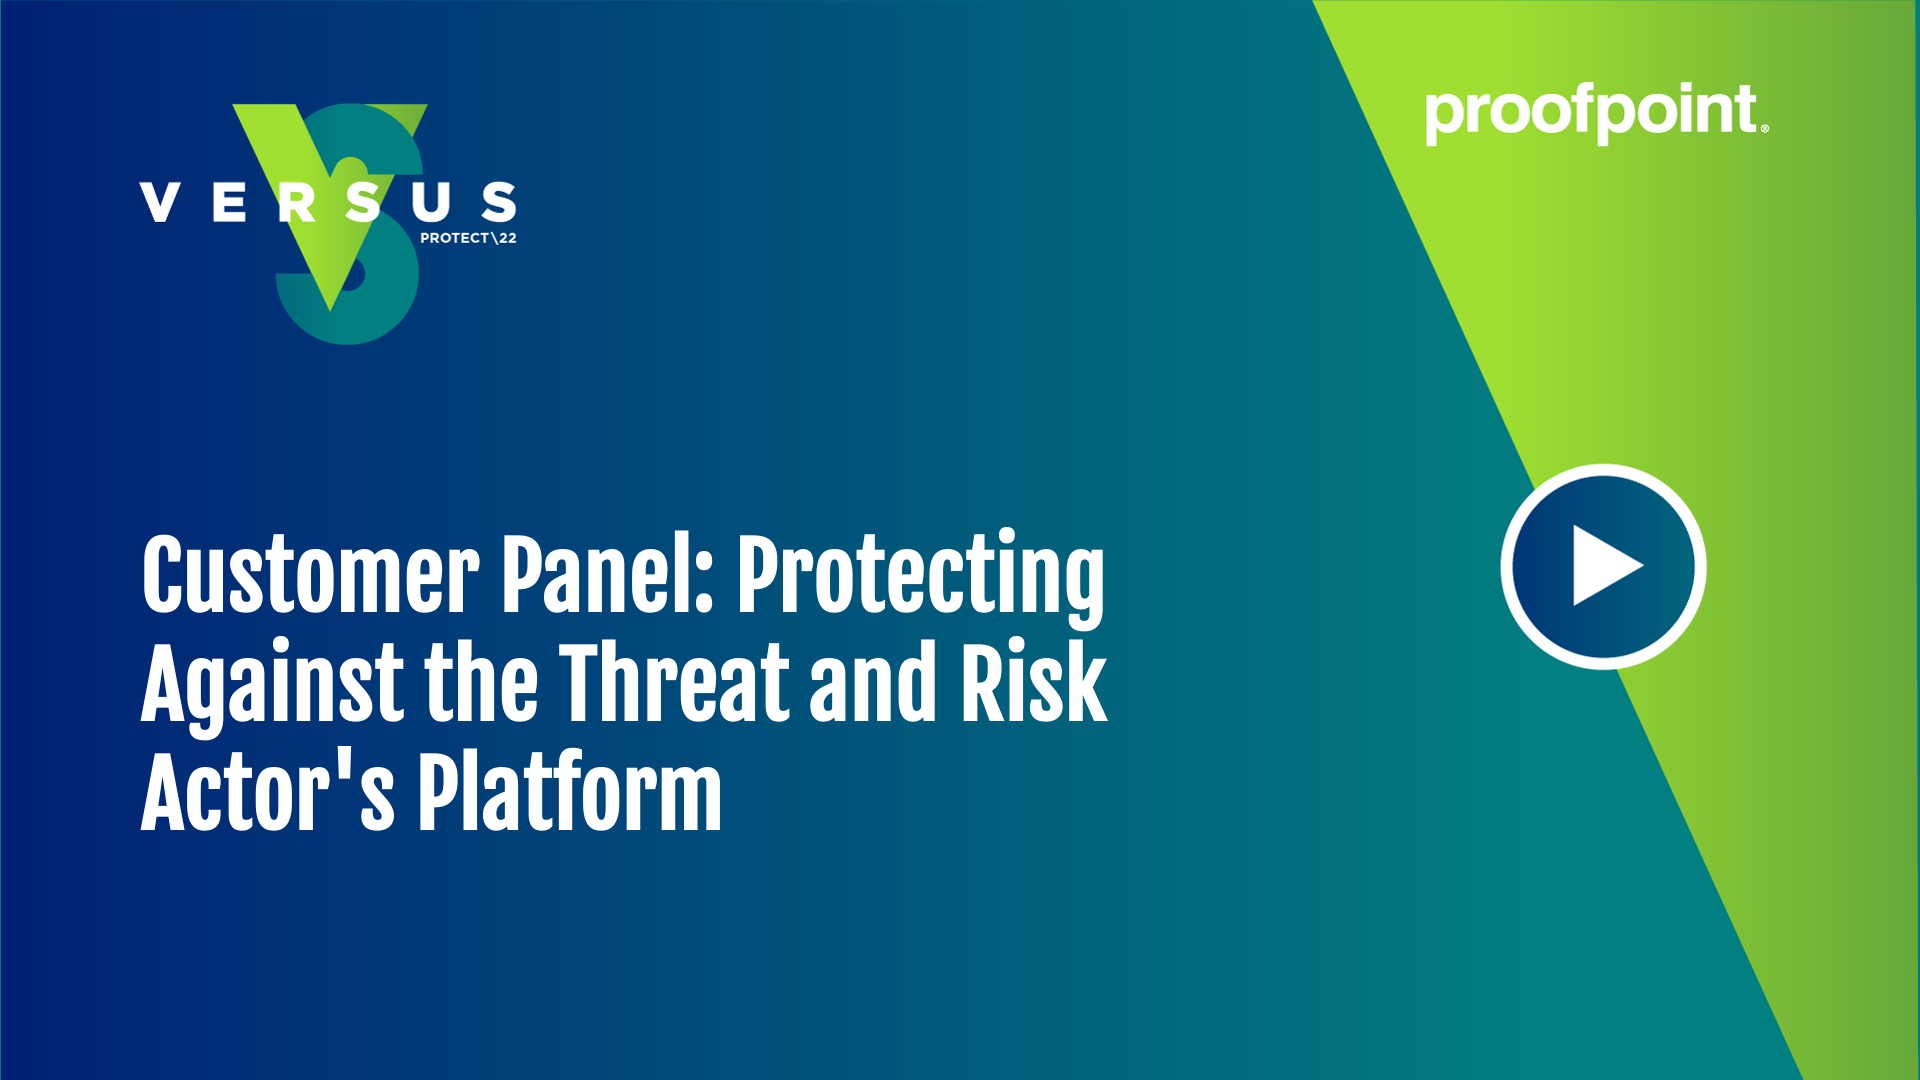 Customer Panel - Protecting Against the Threat and Risk Actor's Platform